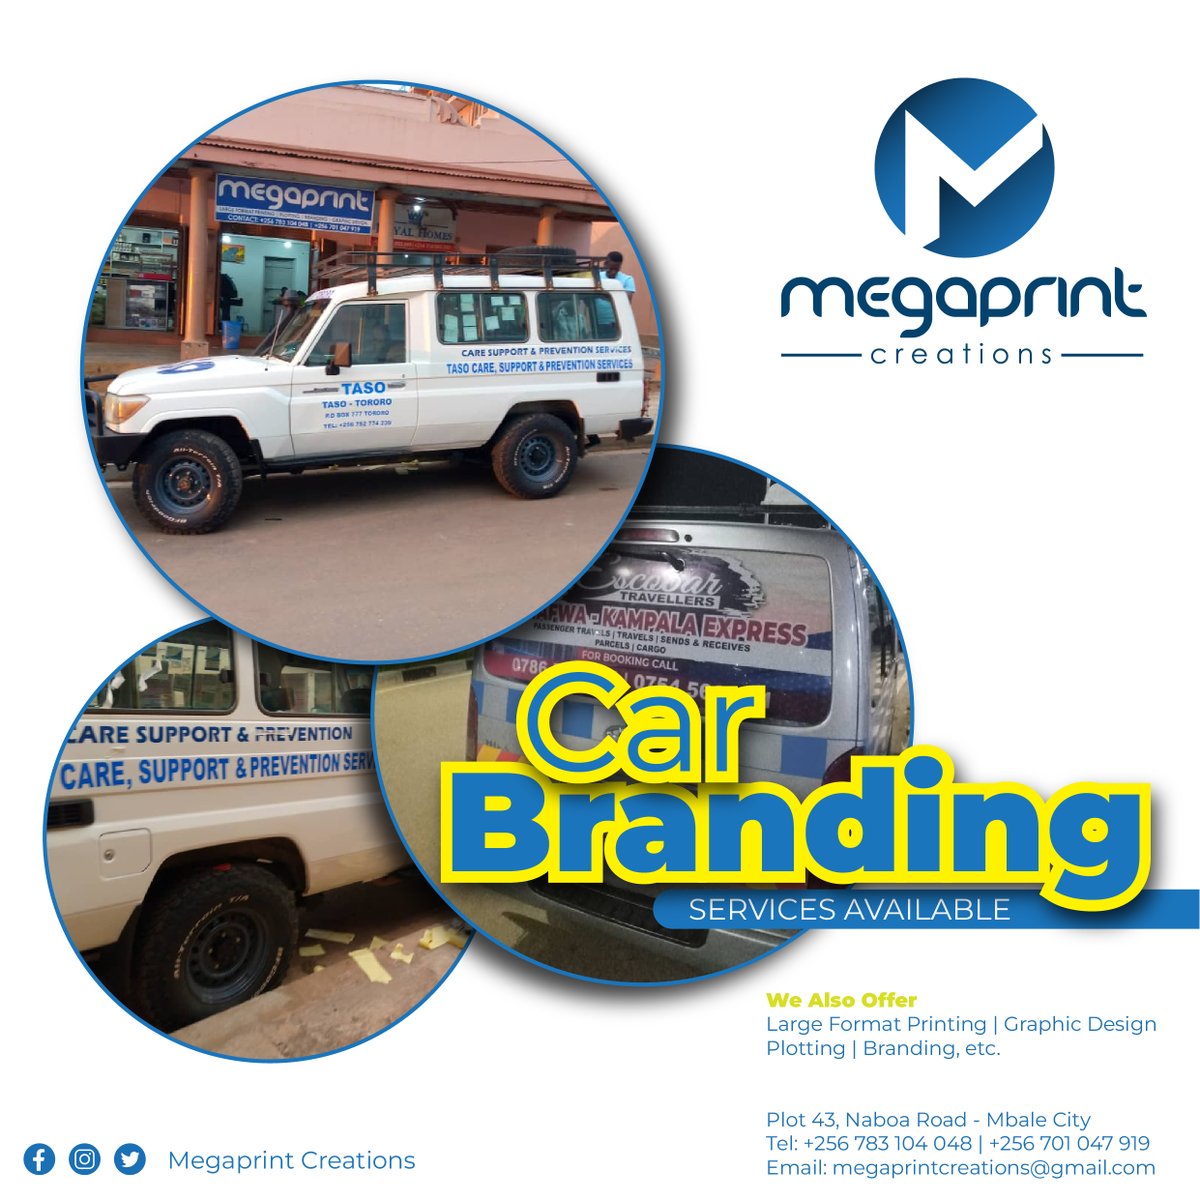 Car Branding services available at Megaprint Creations